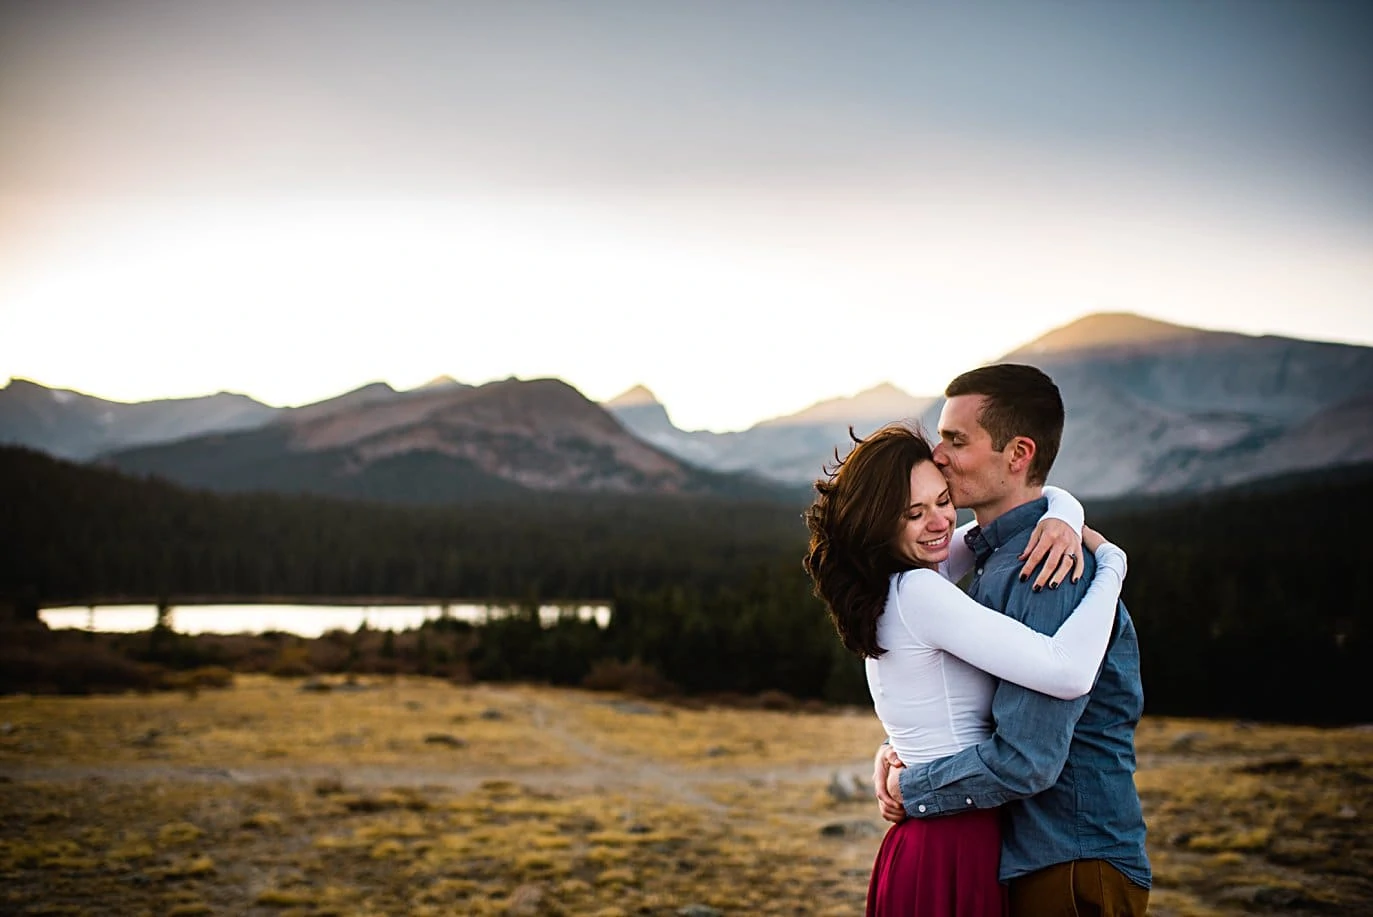 windy engagement session at brainard lake by Boulder wedding photographer Jennie Crate